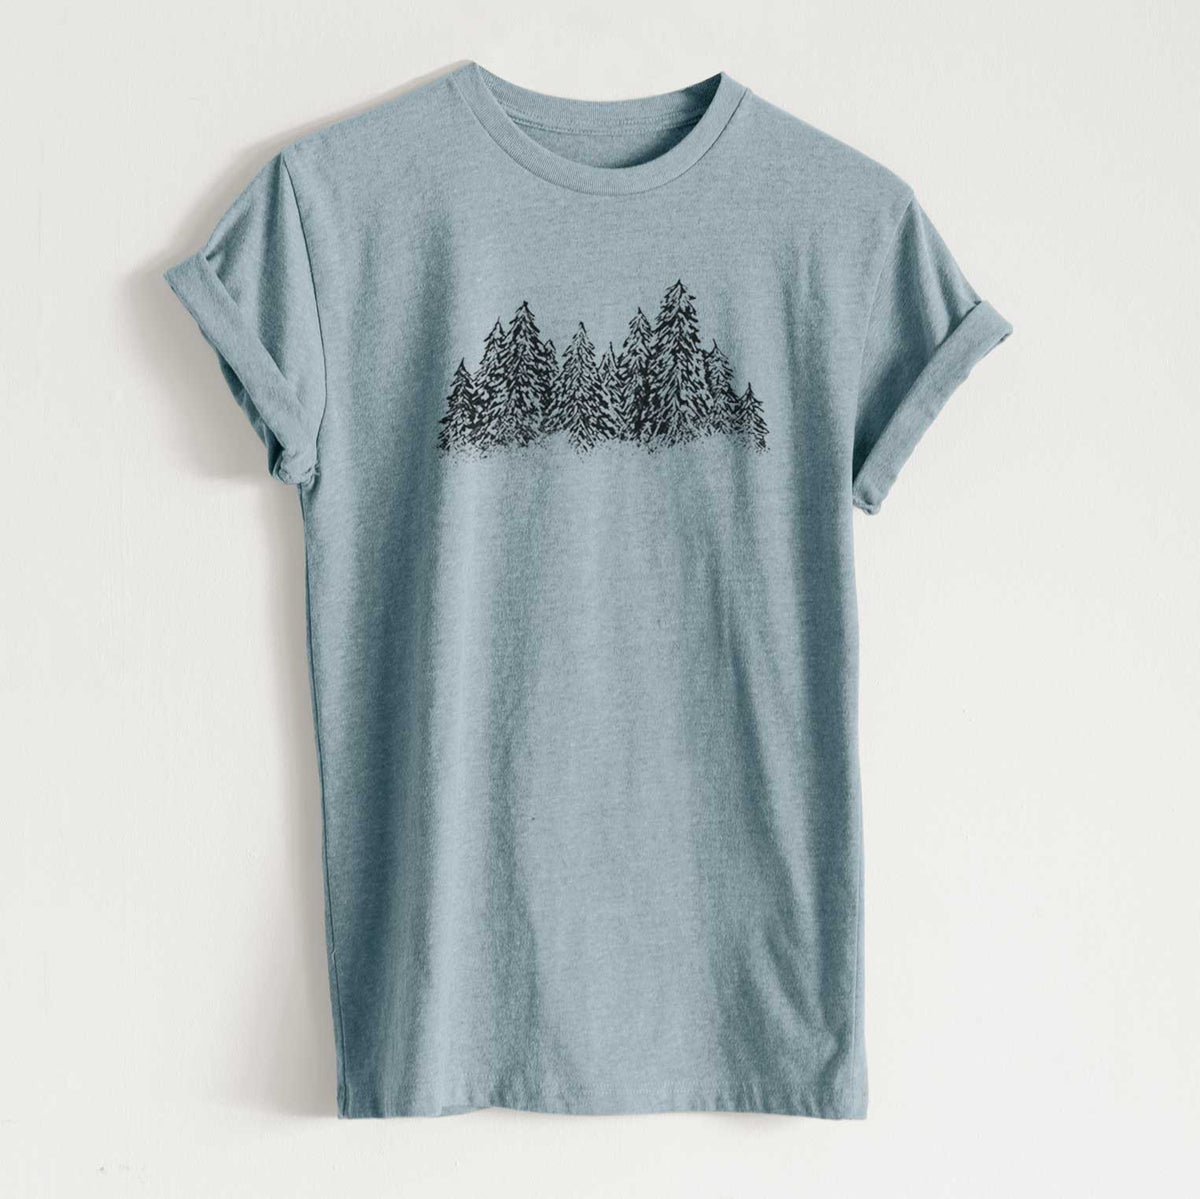 Winter Evergreens - Unisex Recycled Eco Tee  - CLOSEOUT - FINAL SALE